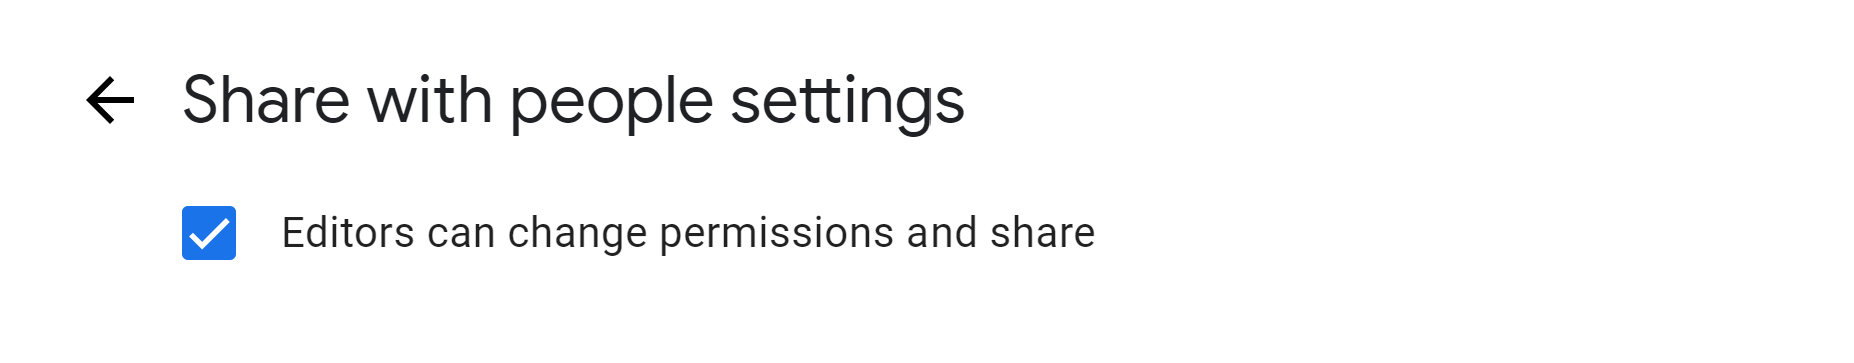 Advanced settings in "Share with people settings"